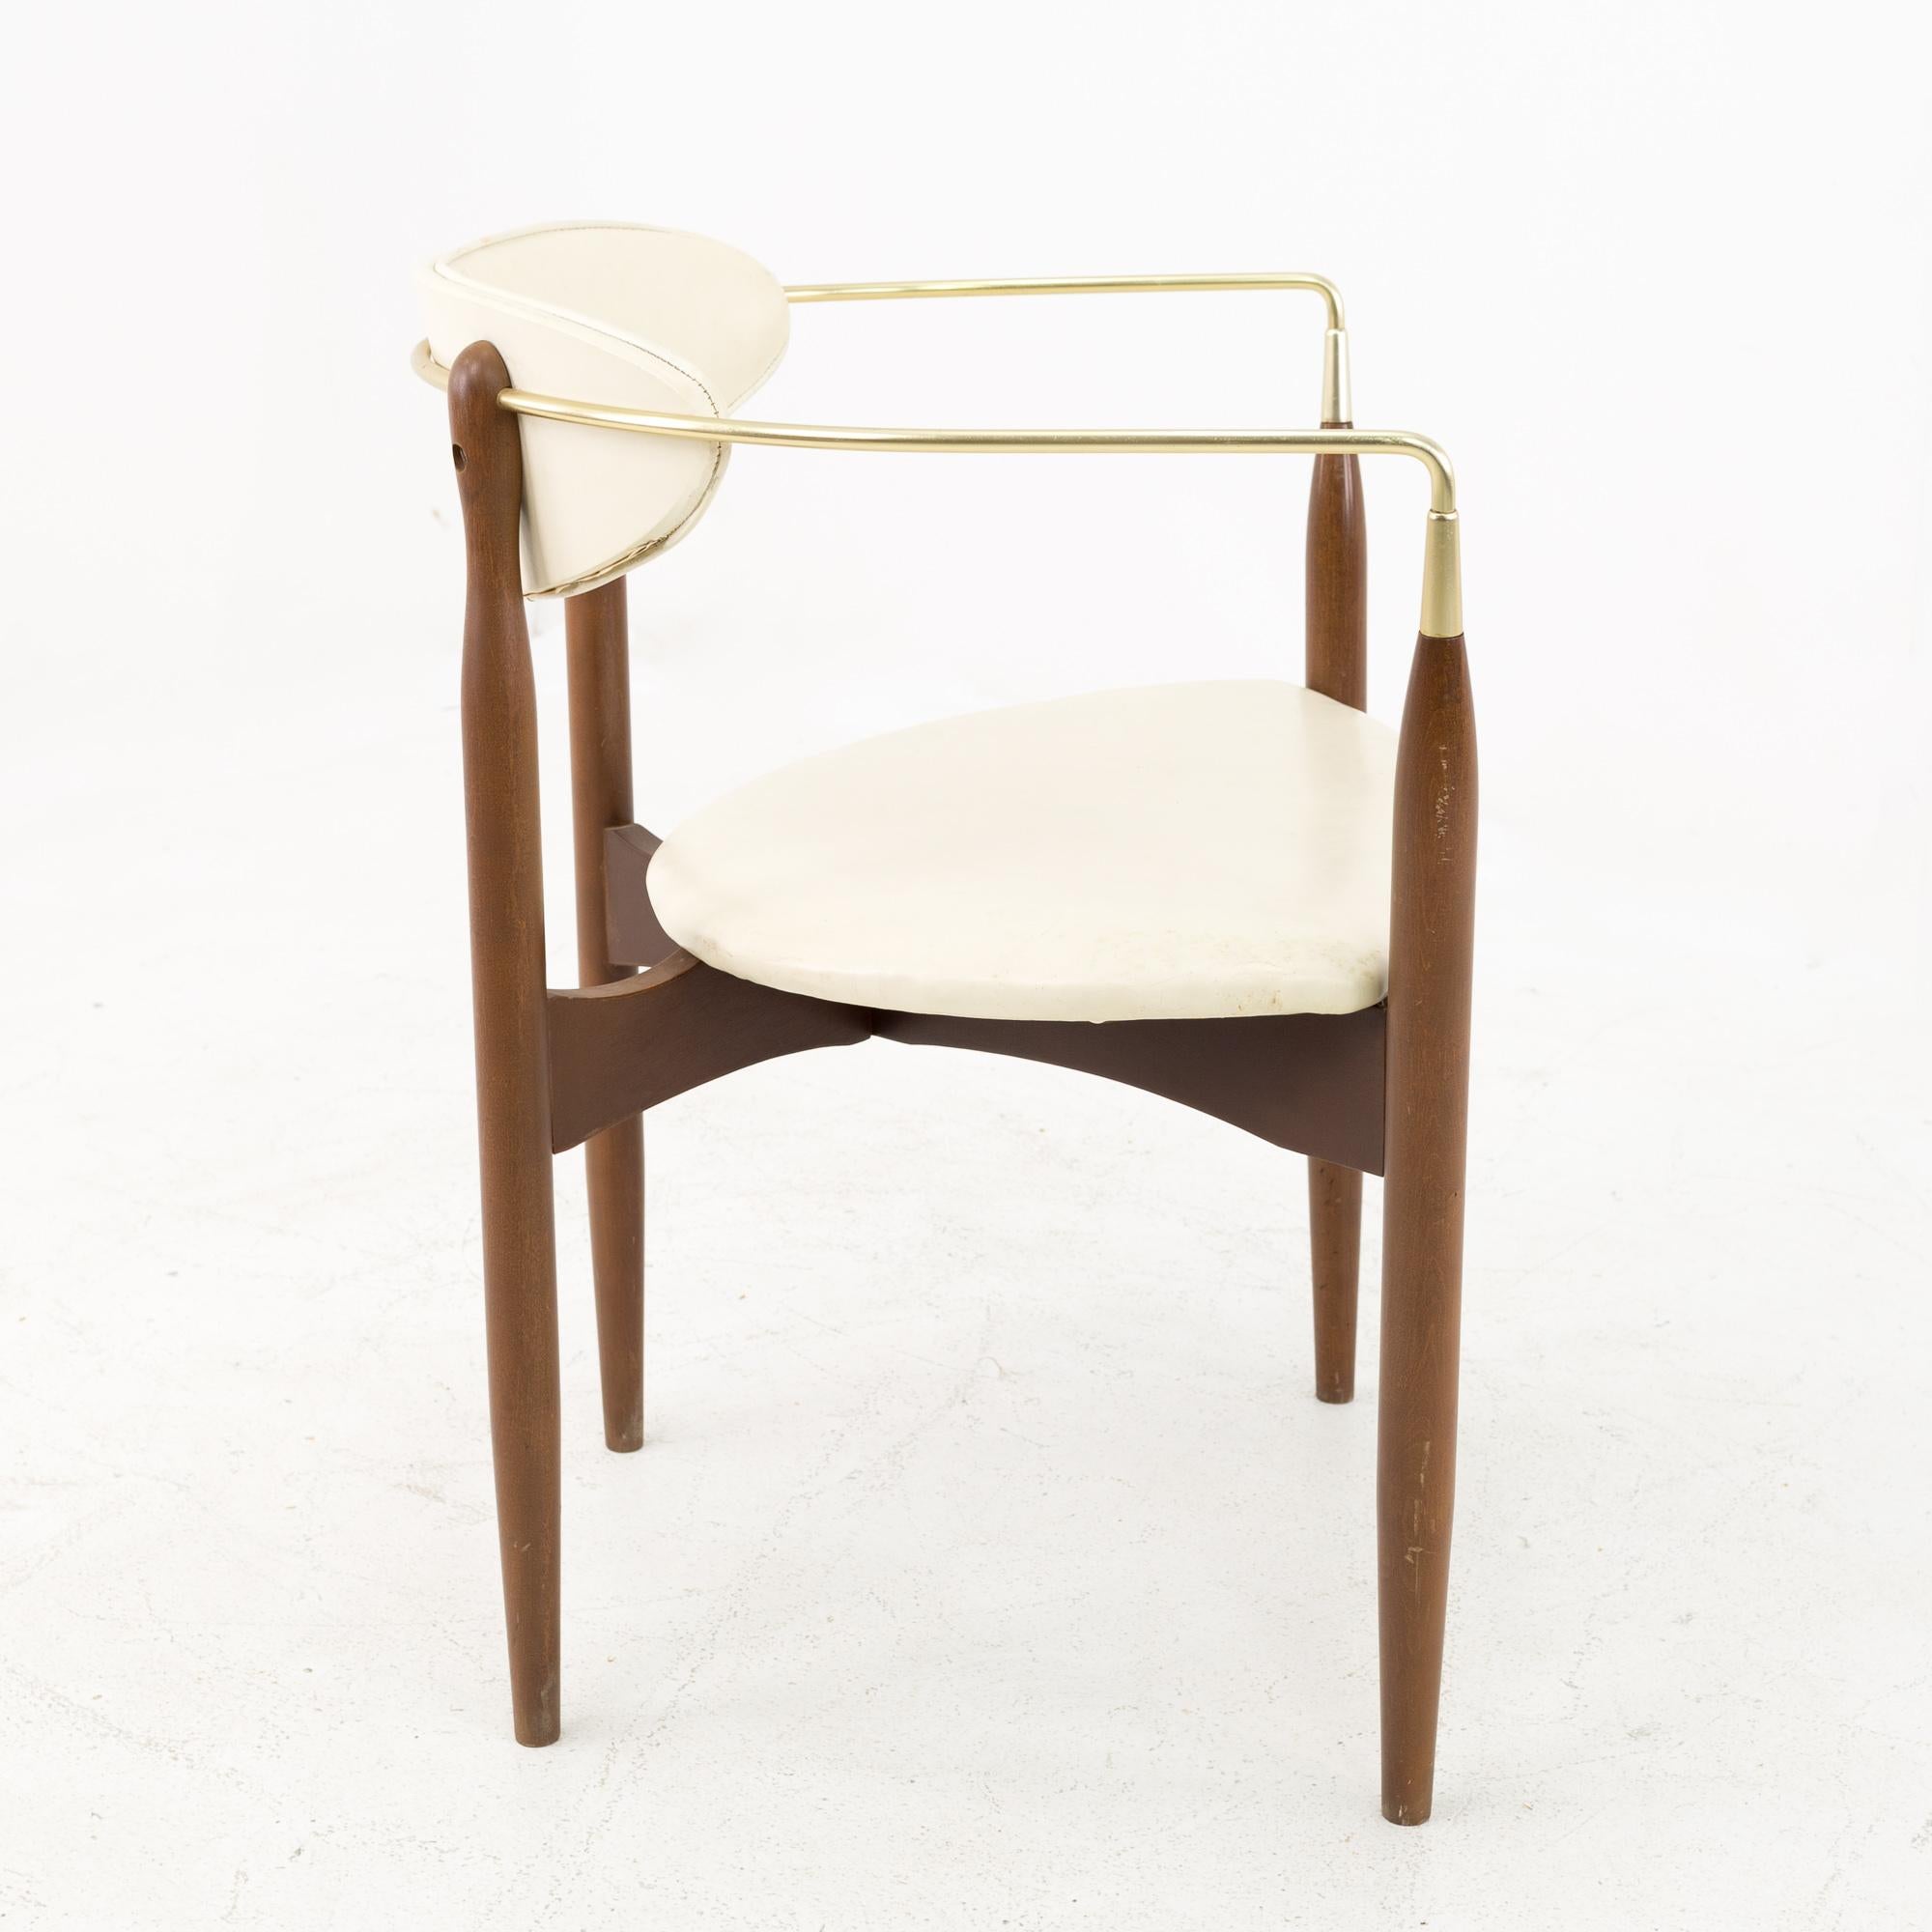 Danish Dan Johnson for Selig Viscount Midcentury Walnut and Brass Dining Chairs, Pair